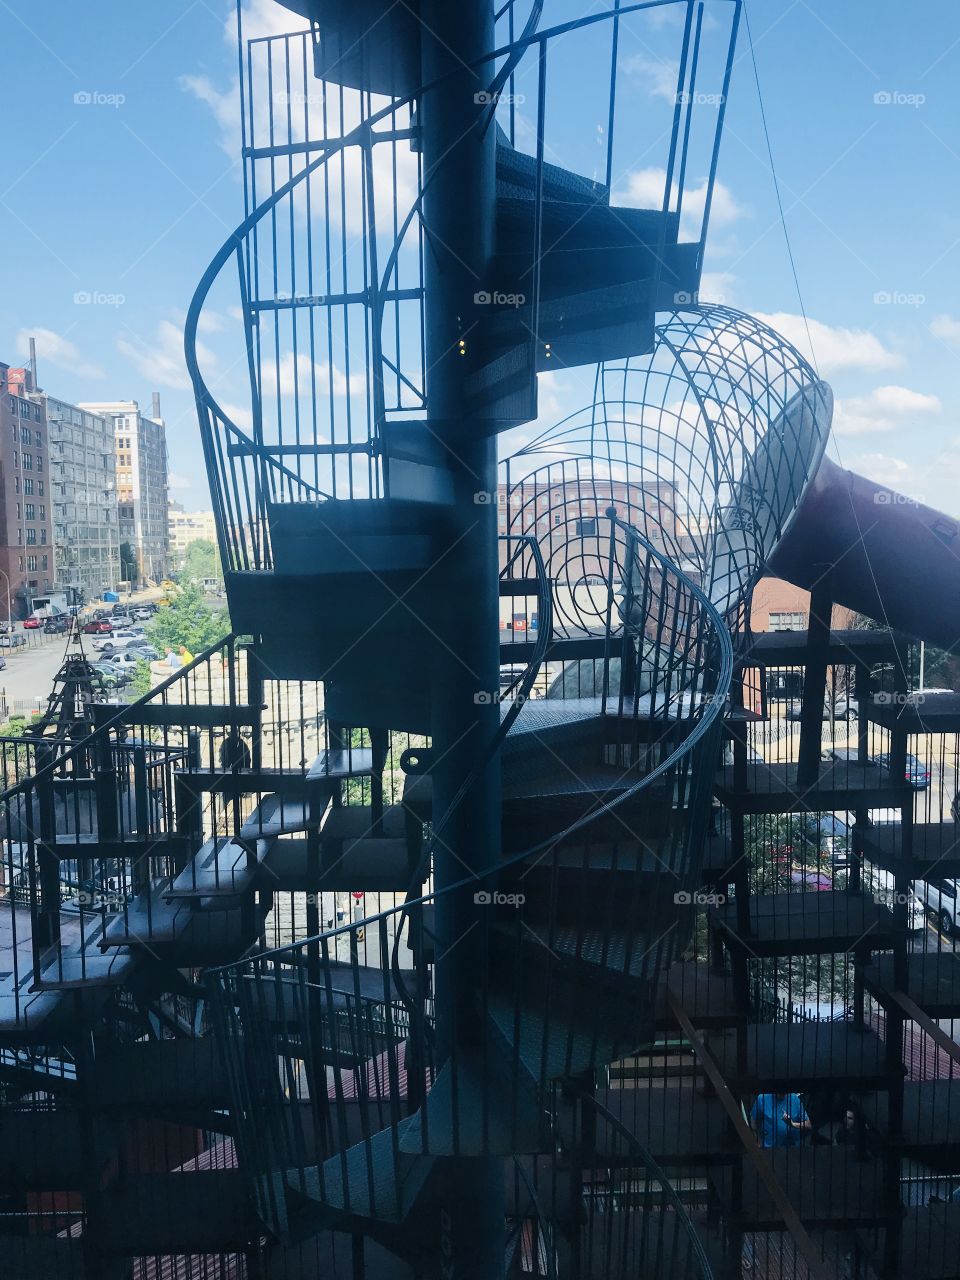 A very modern steel stairwell outside the City Museum in St. Louis that also overlooks parts of the city’s 